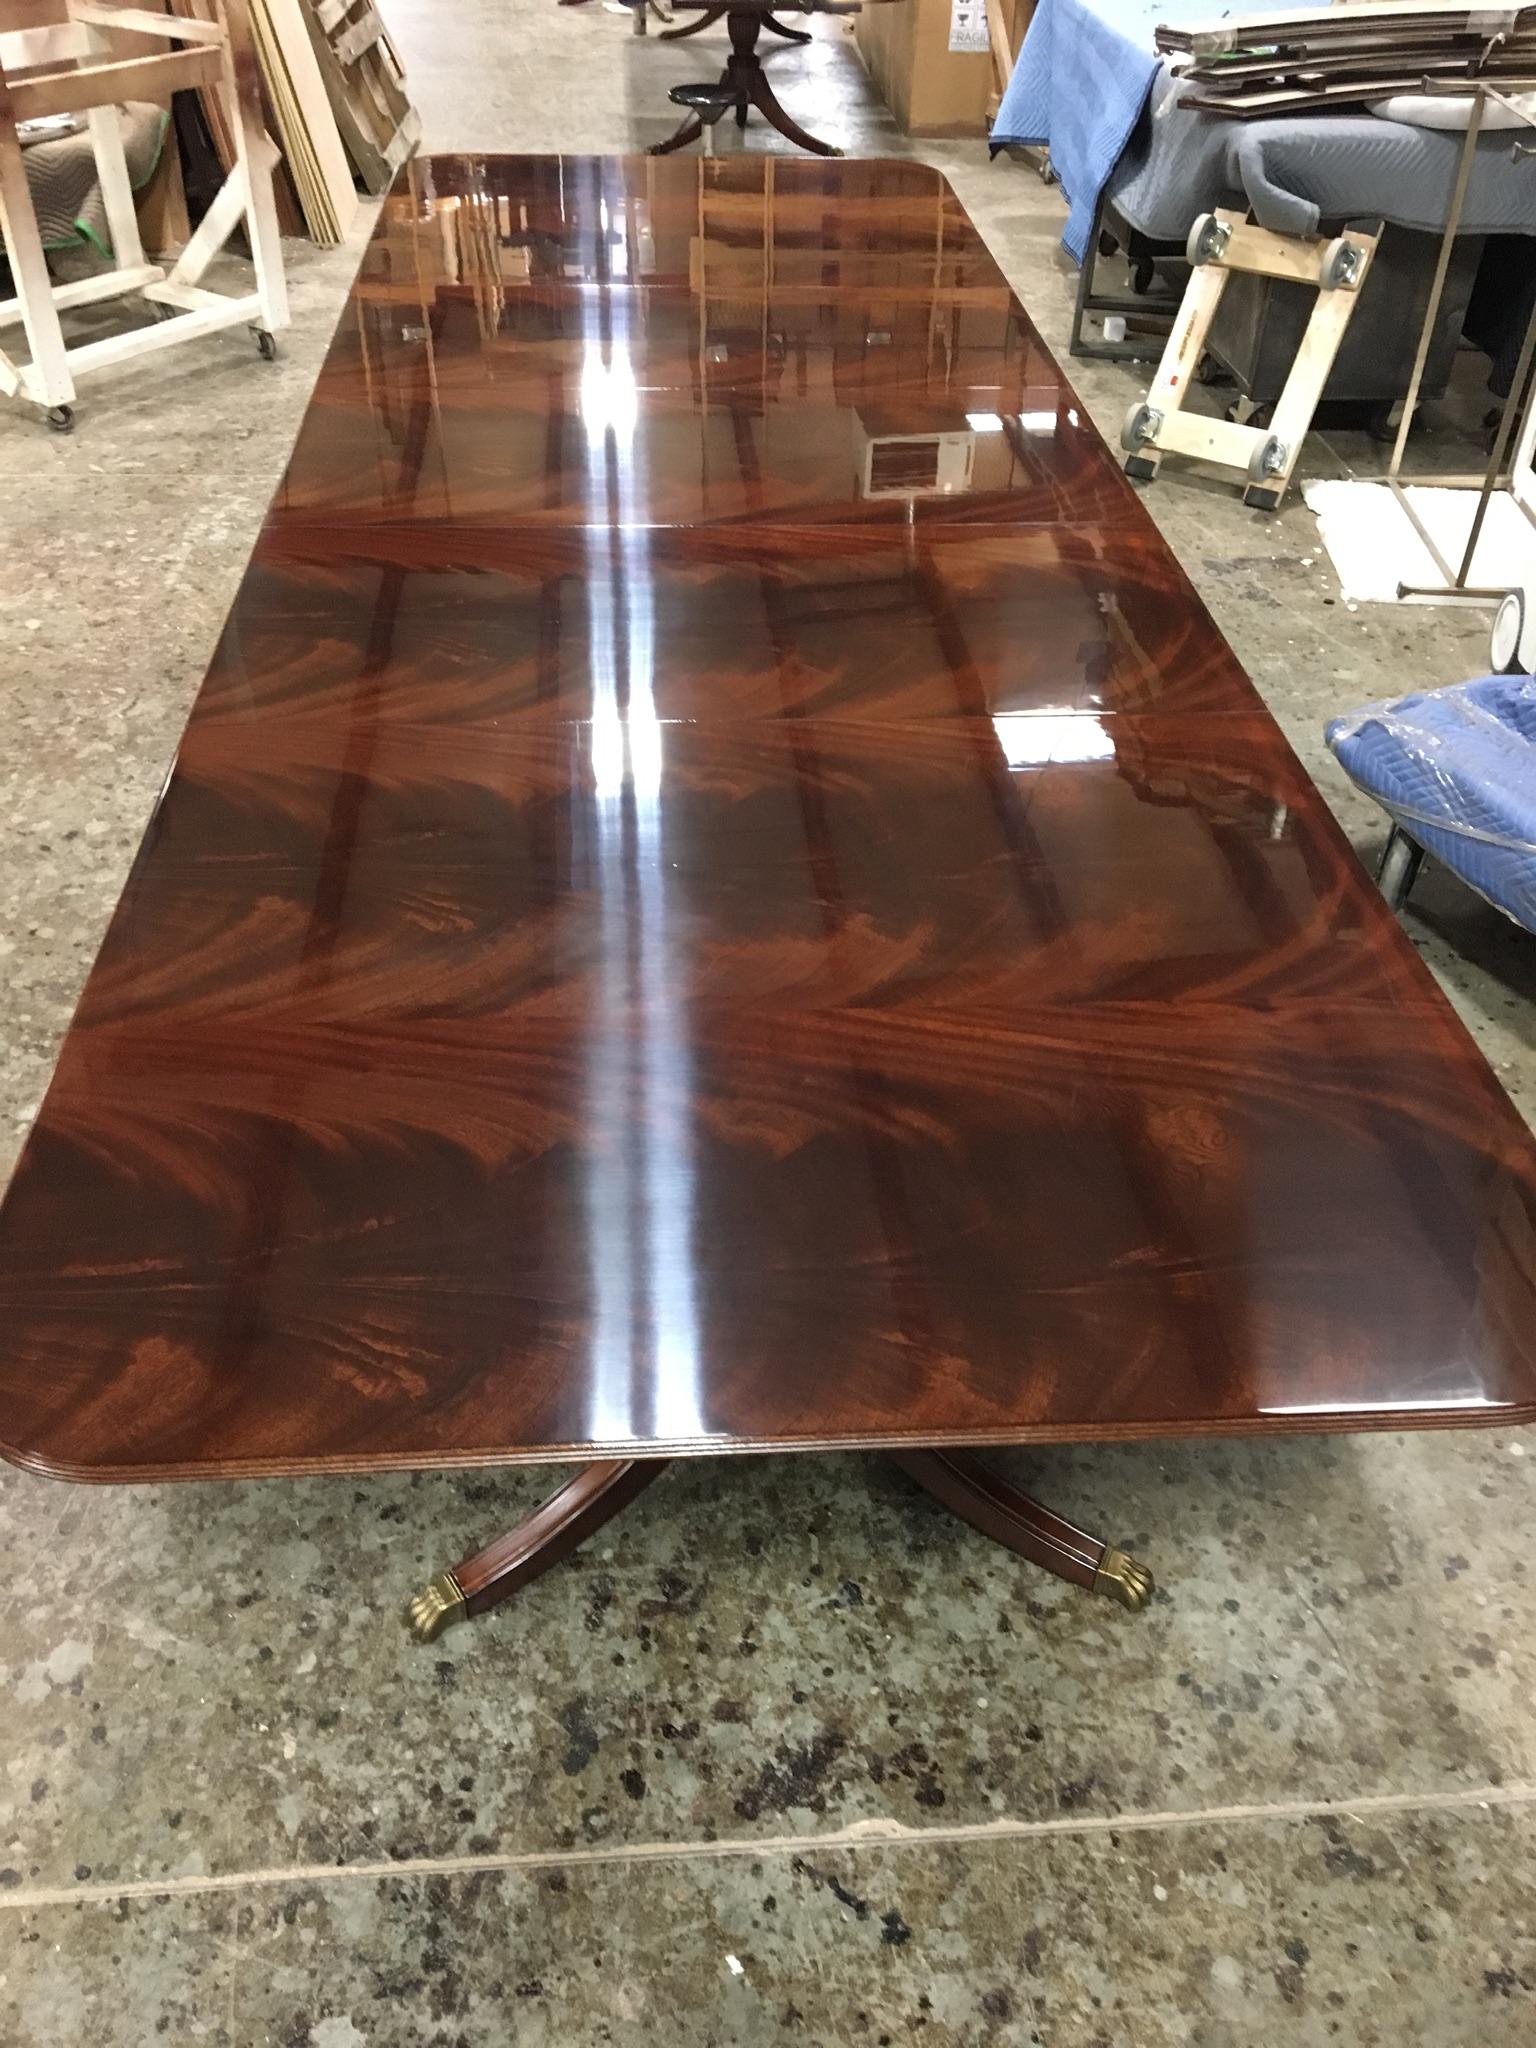 This is a made-to-order large traditional mahogany banquet / dining table made in the Leighton Hall shop. It is modeled after the understated swirly crotch mahogany tables made in the 1800s and early 1900s. It features a field of slip-matched swirly